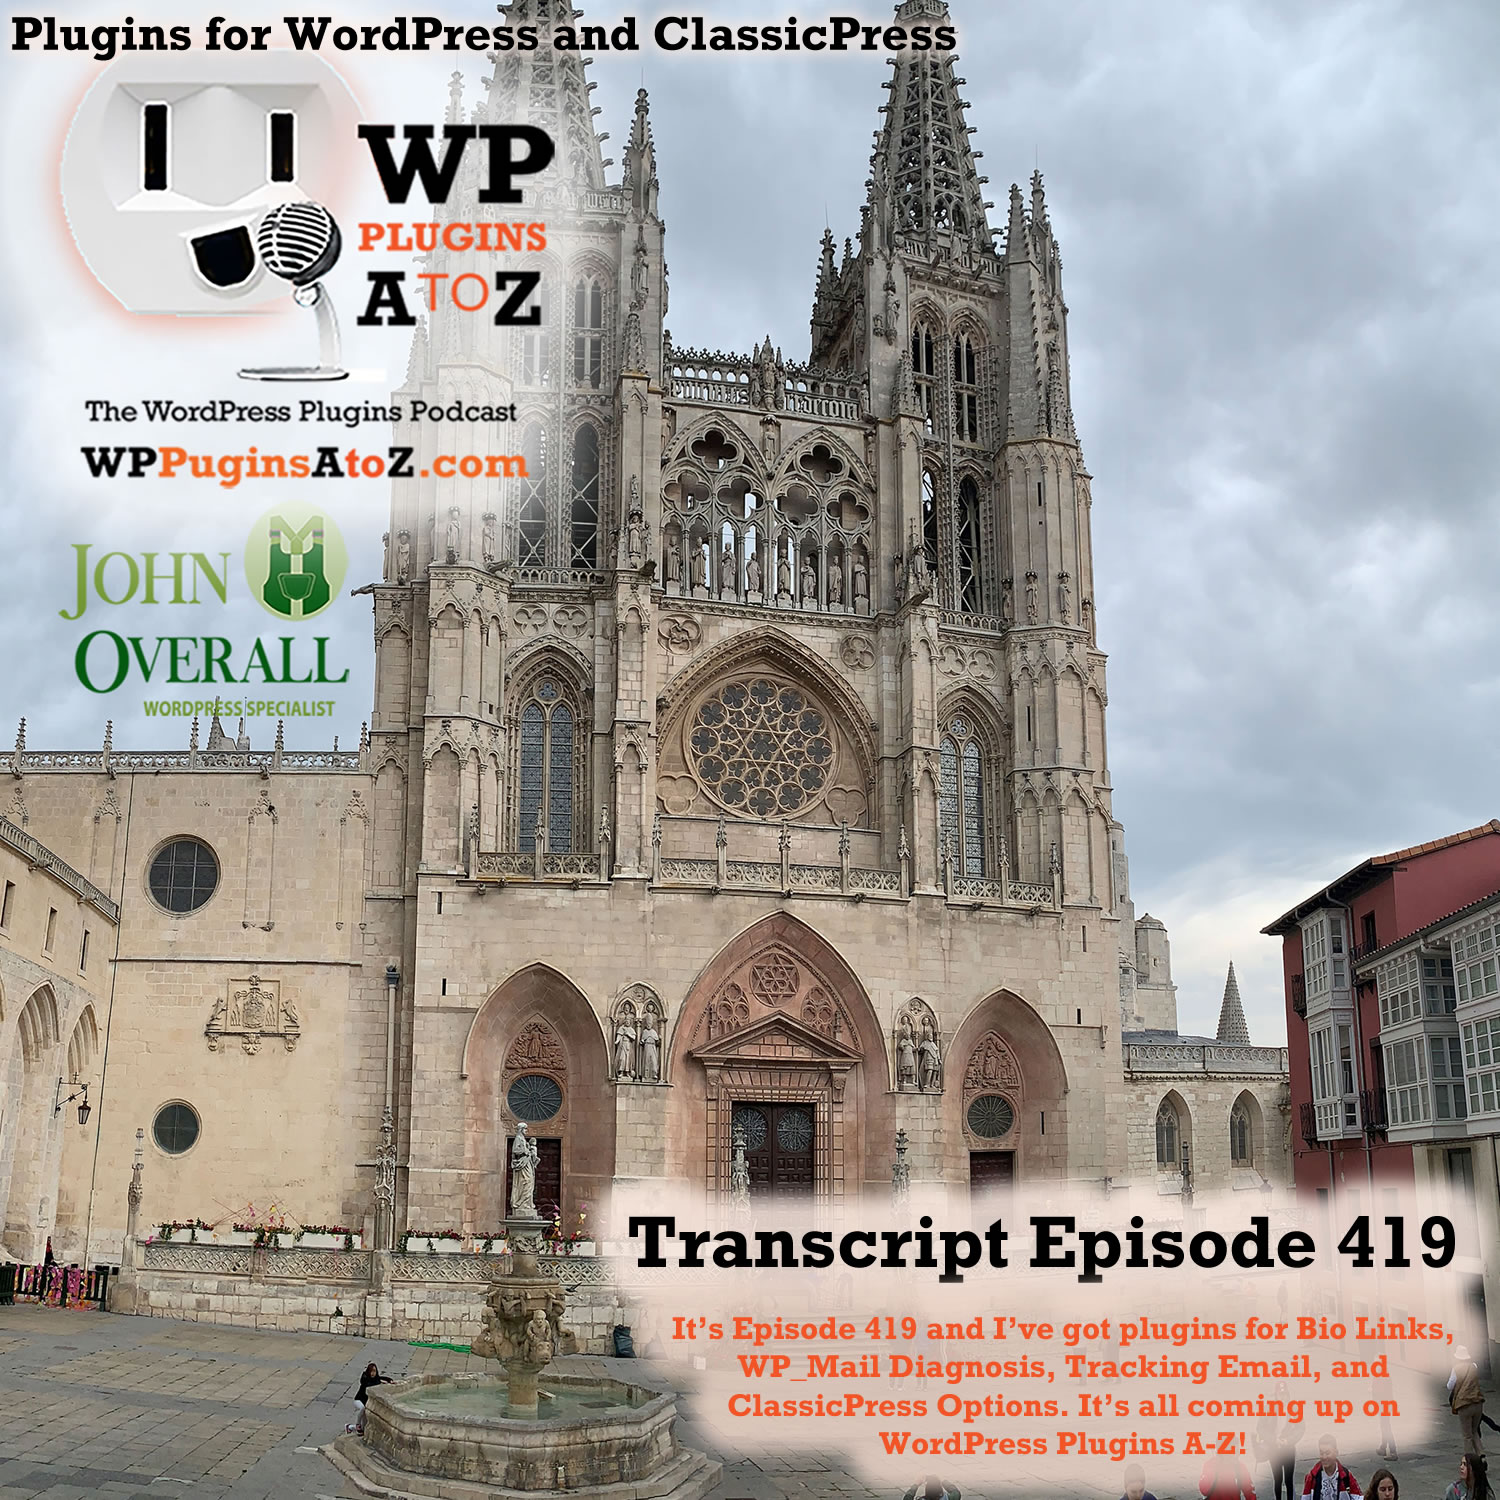 It’s Episode 419 and I’ve got plugins for Bio Links, WP Mail Diagnosis, Tracking Email, and ClassicPress Options, all coming up on WordPress Plugins from A-Z!